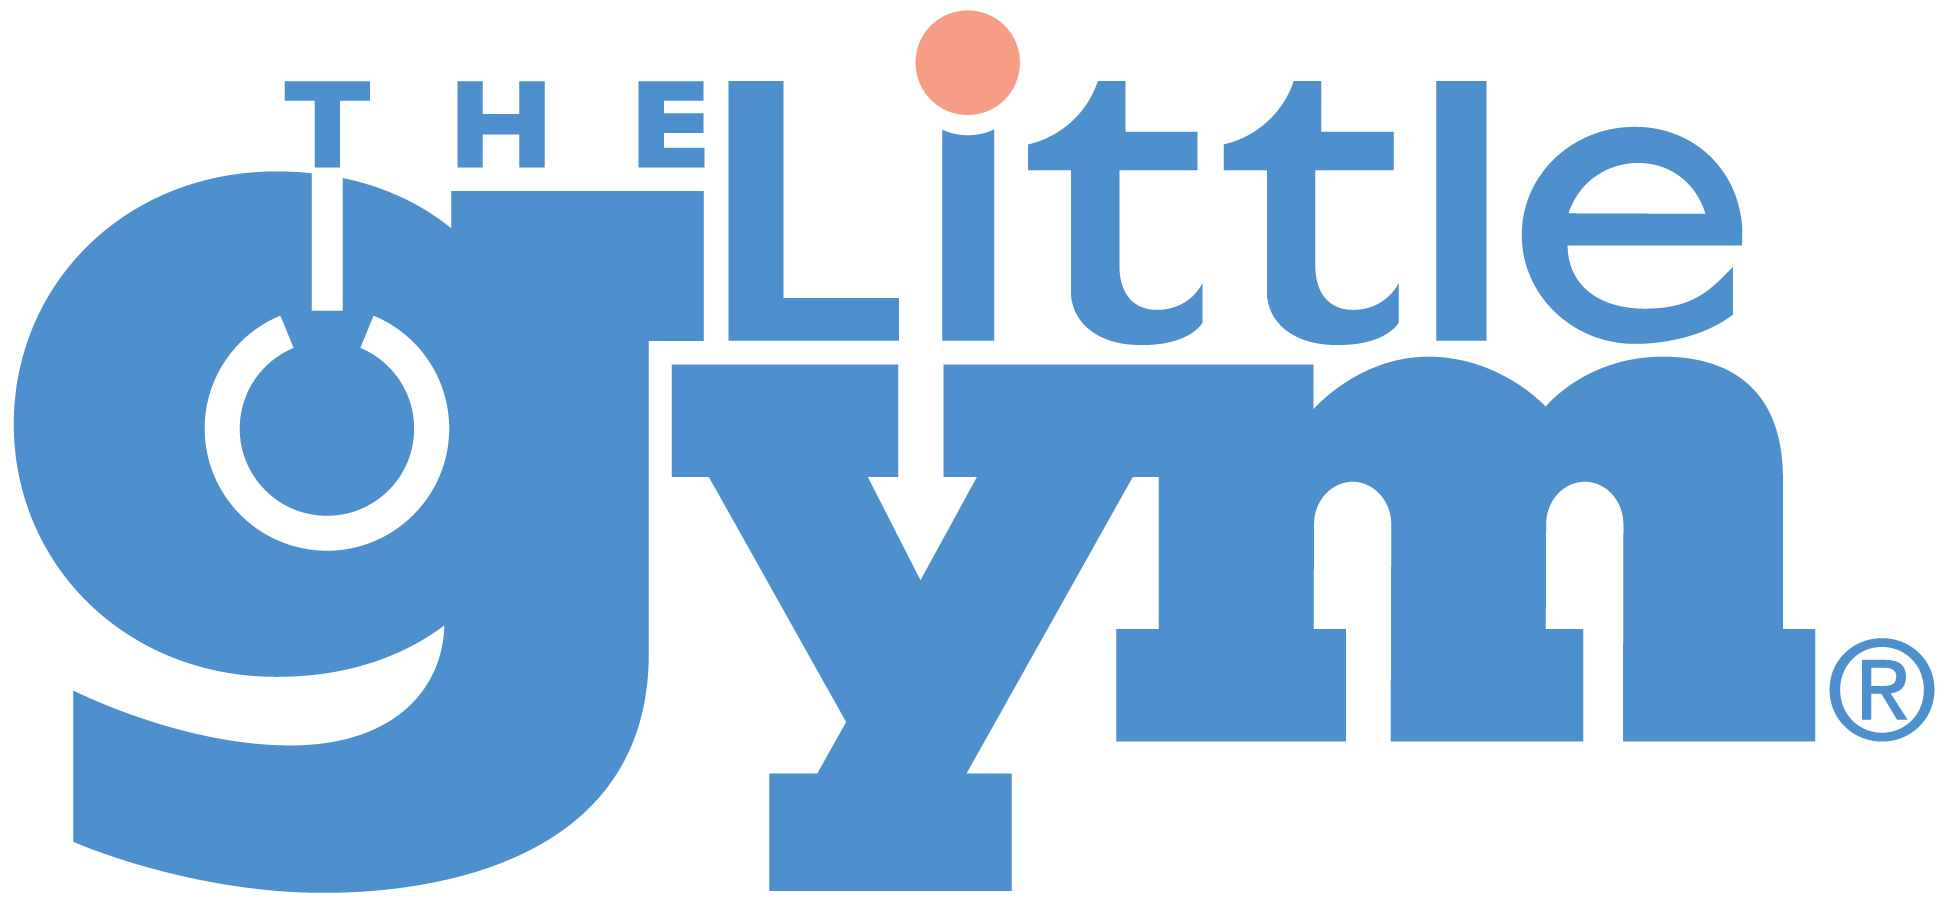 The Little Gym logo with blue text and a gymnast icon